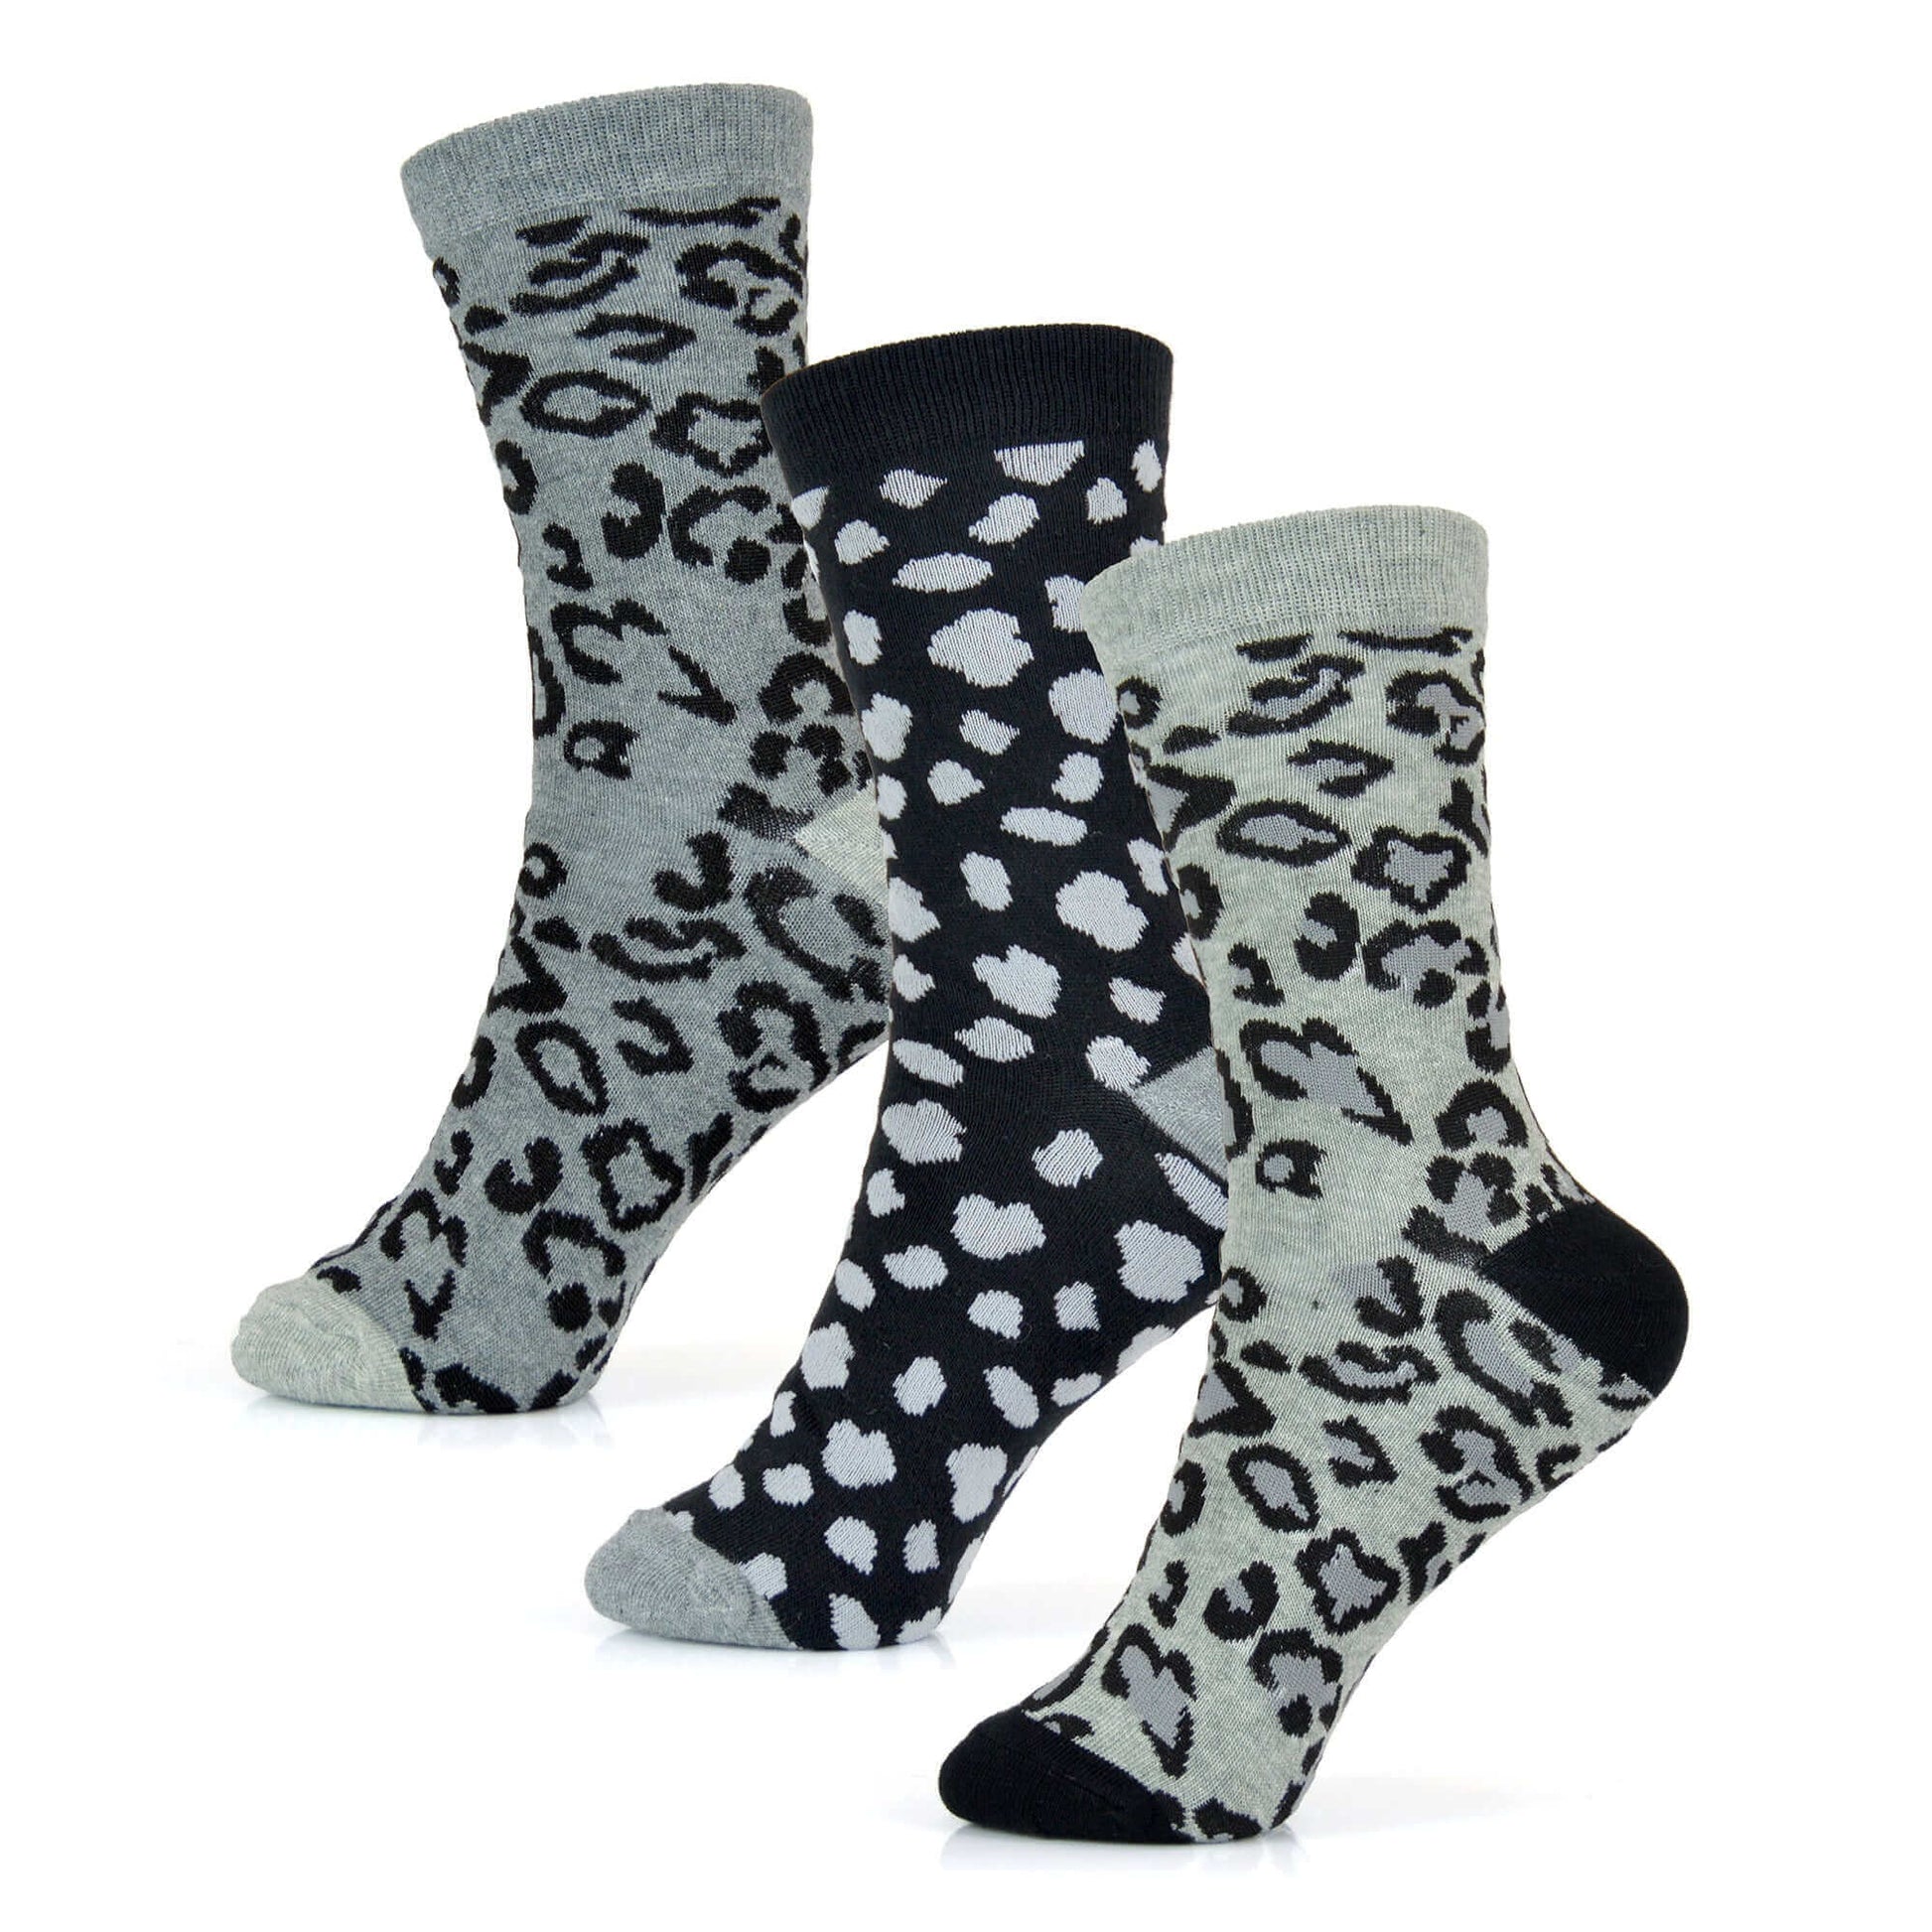 Pack Of 6 Women's Design Socks Easy Care Every Day Cotton Rich Sock For Ladies. Buy now for £8.00. A Socks by Sock Stack. 4-7, animals, argyle, assorted, black, black socks, blue, boot, boot socks, breathable, cats, cats dogs, comfortable, cosy, cotton, d